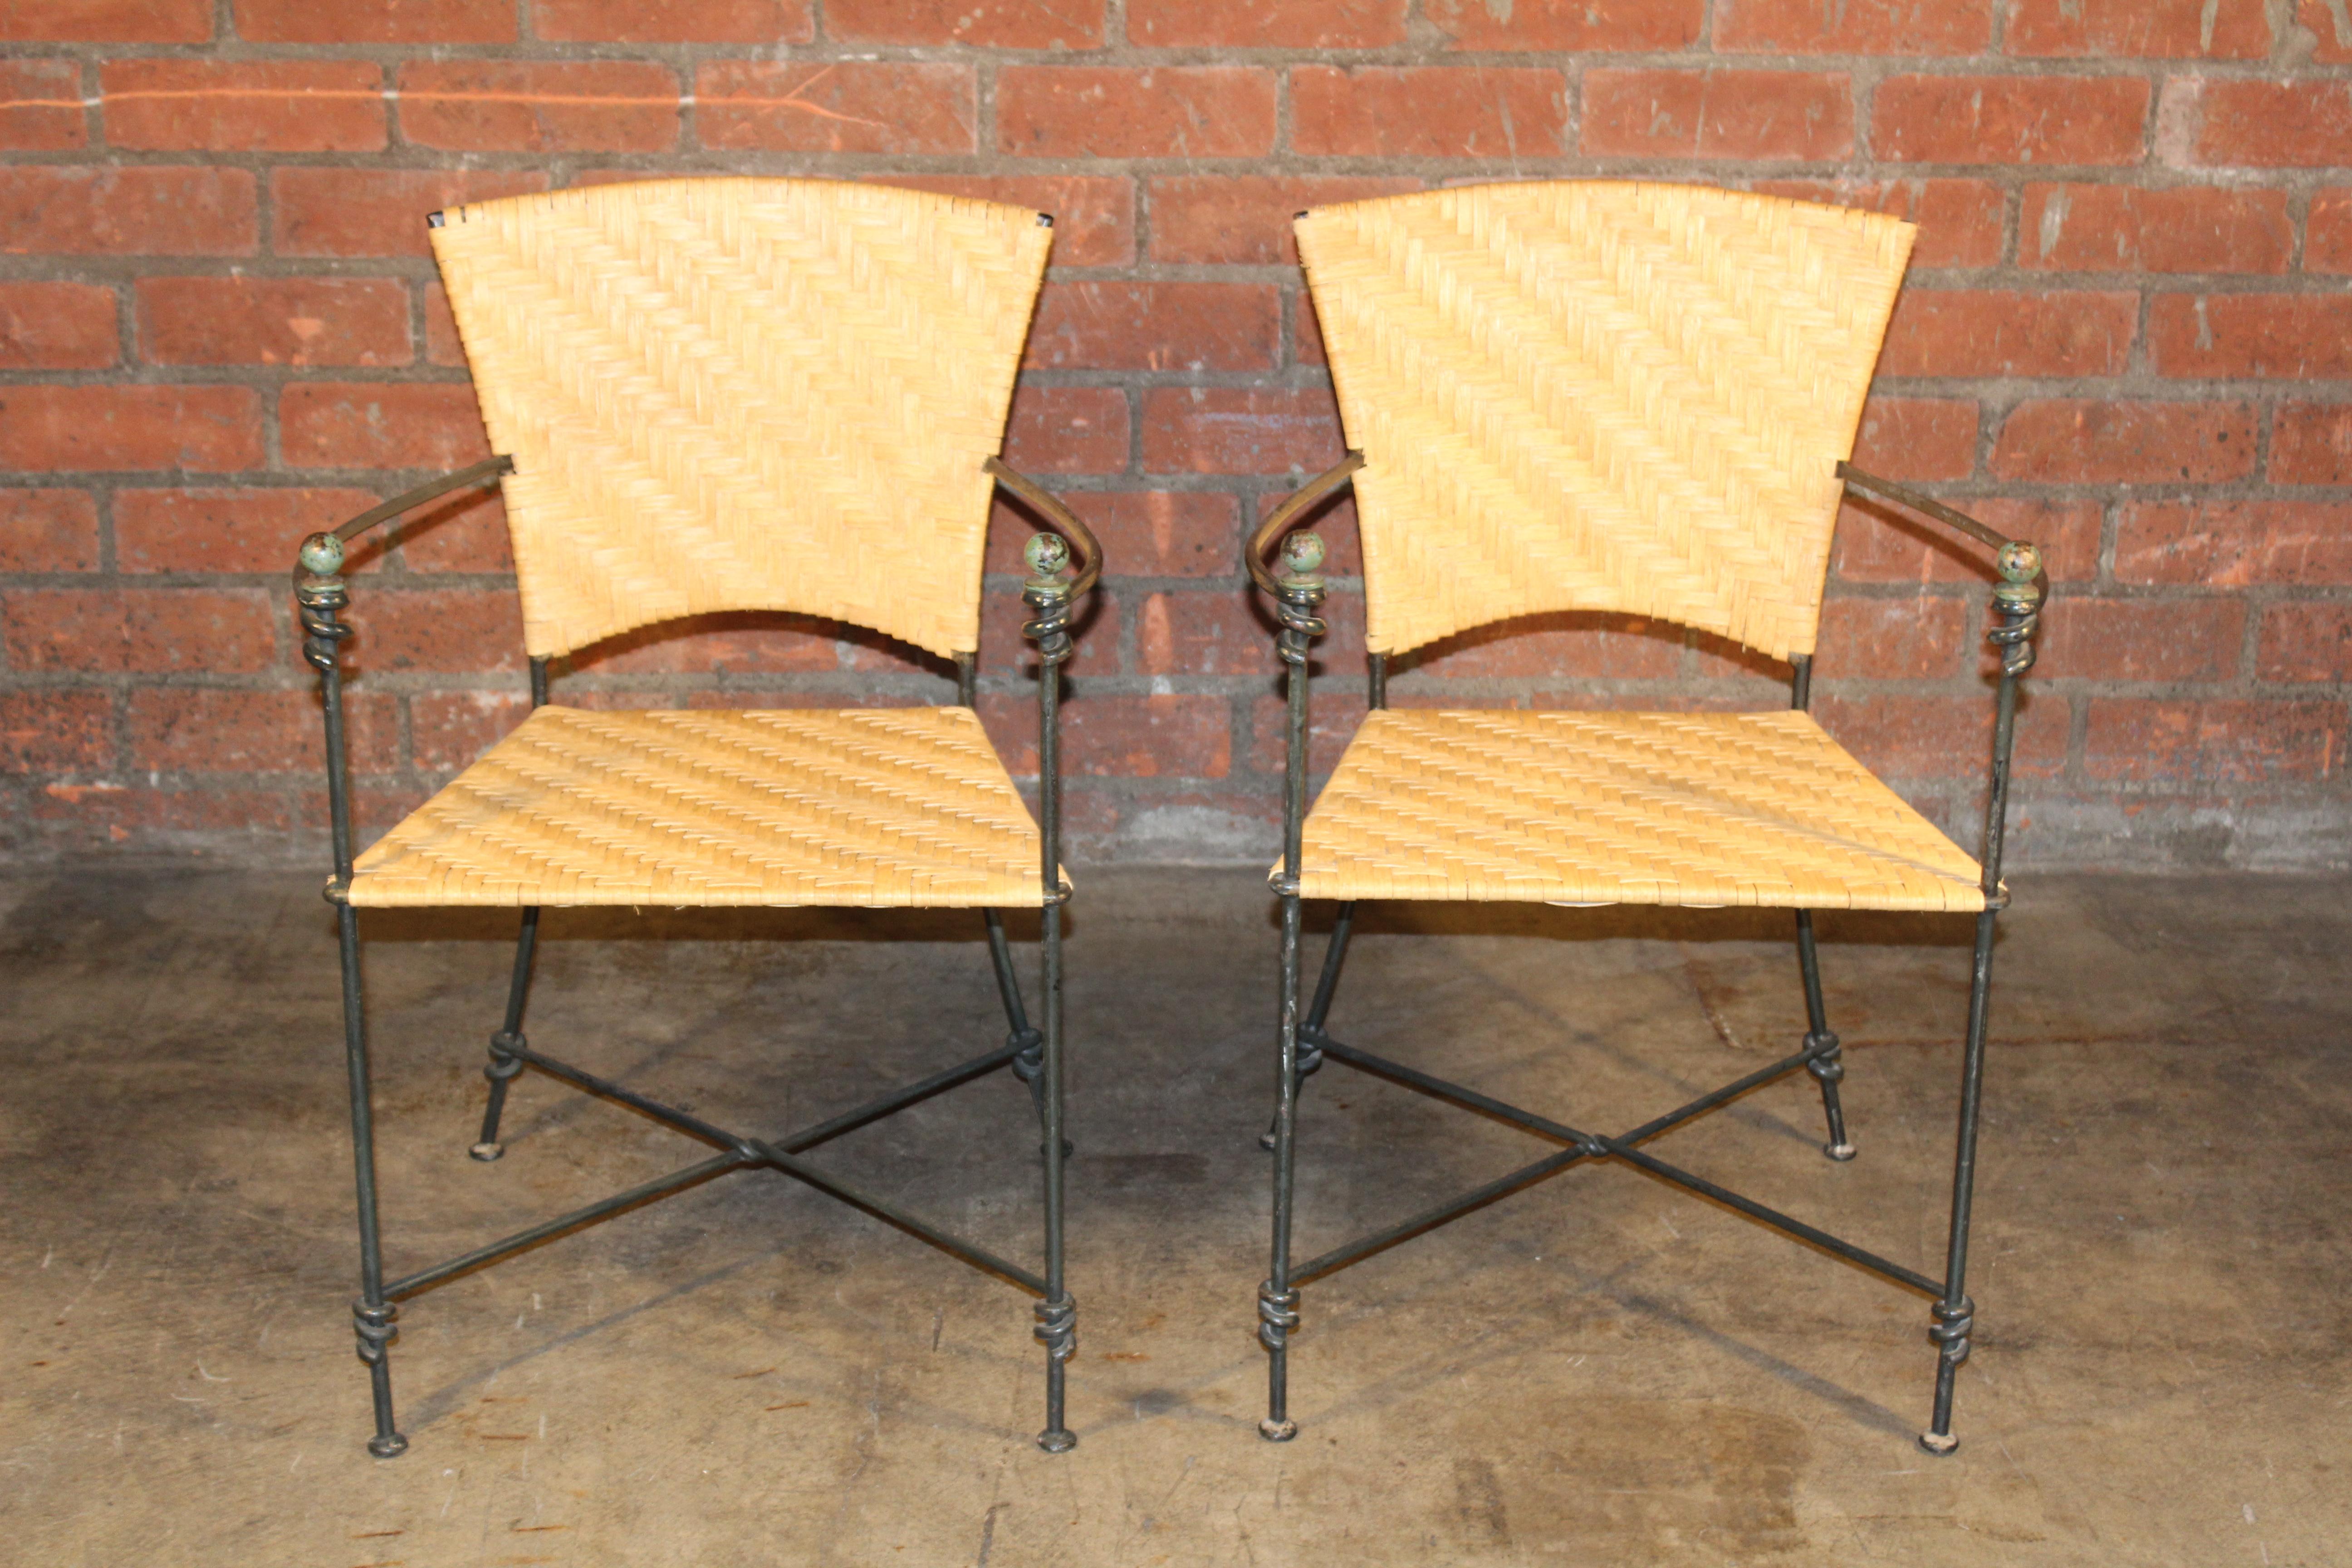 Pair of iron armchairs with new rattan woven seats and backs. In good condition, the iron frames show patina. Sold as a pair.